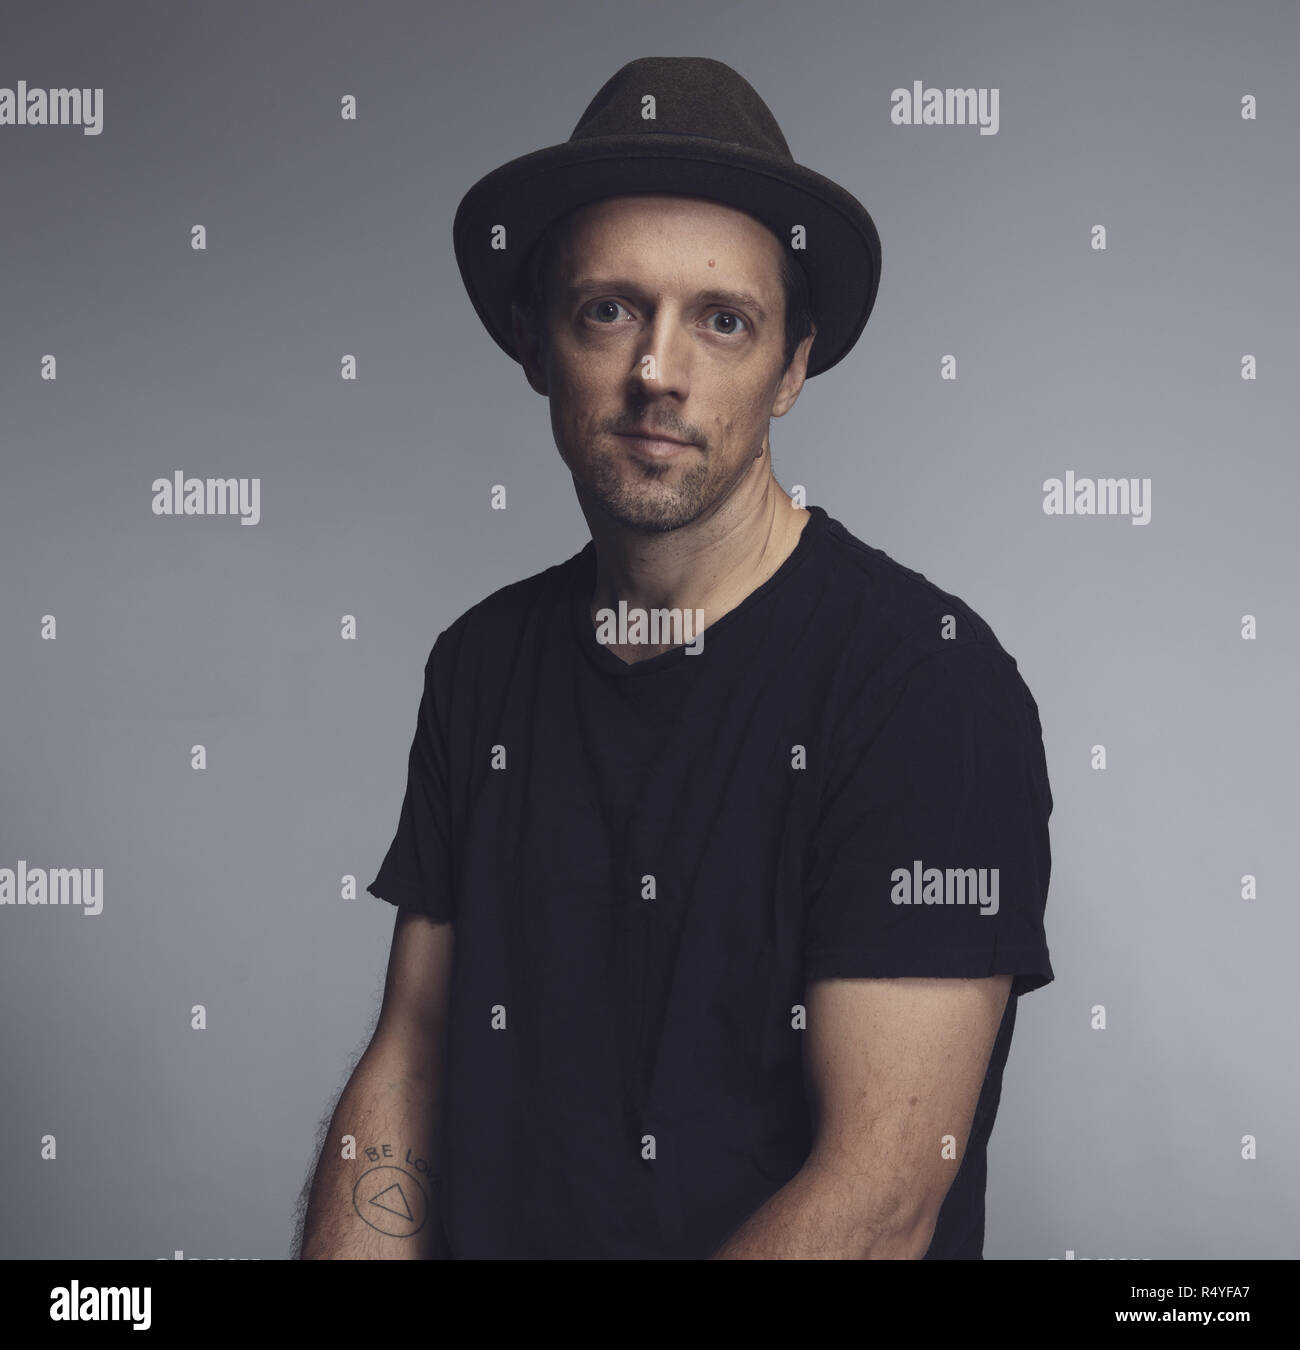 July 10, 2018 - 2018-07-10, Los Angeles CA. Portrait session with Jason Mraz. Jason Mraz is an American singer-songwriter who first came to prominence in the San Diego coffee shop scene in 2000. In 2002, he released his debut studio album, Waiting for My Rocket to Come, which contained the hit single ''The Remedy (I Won't Worry)''. With the release of his second album, Mr. A-Z, in 2005, Mraz achieved major commercial success. The album peaked at number 5 on the Billboard 200 and sold over 100,000 copies in the US (Credit Image: © Brian LoweZUMA Wire) Stock Photo